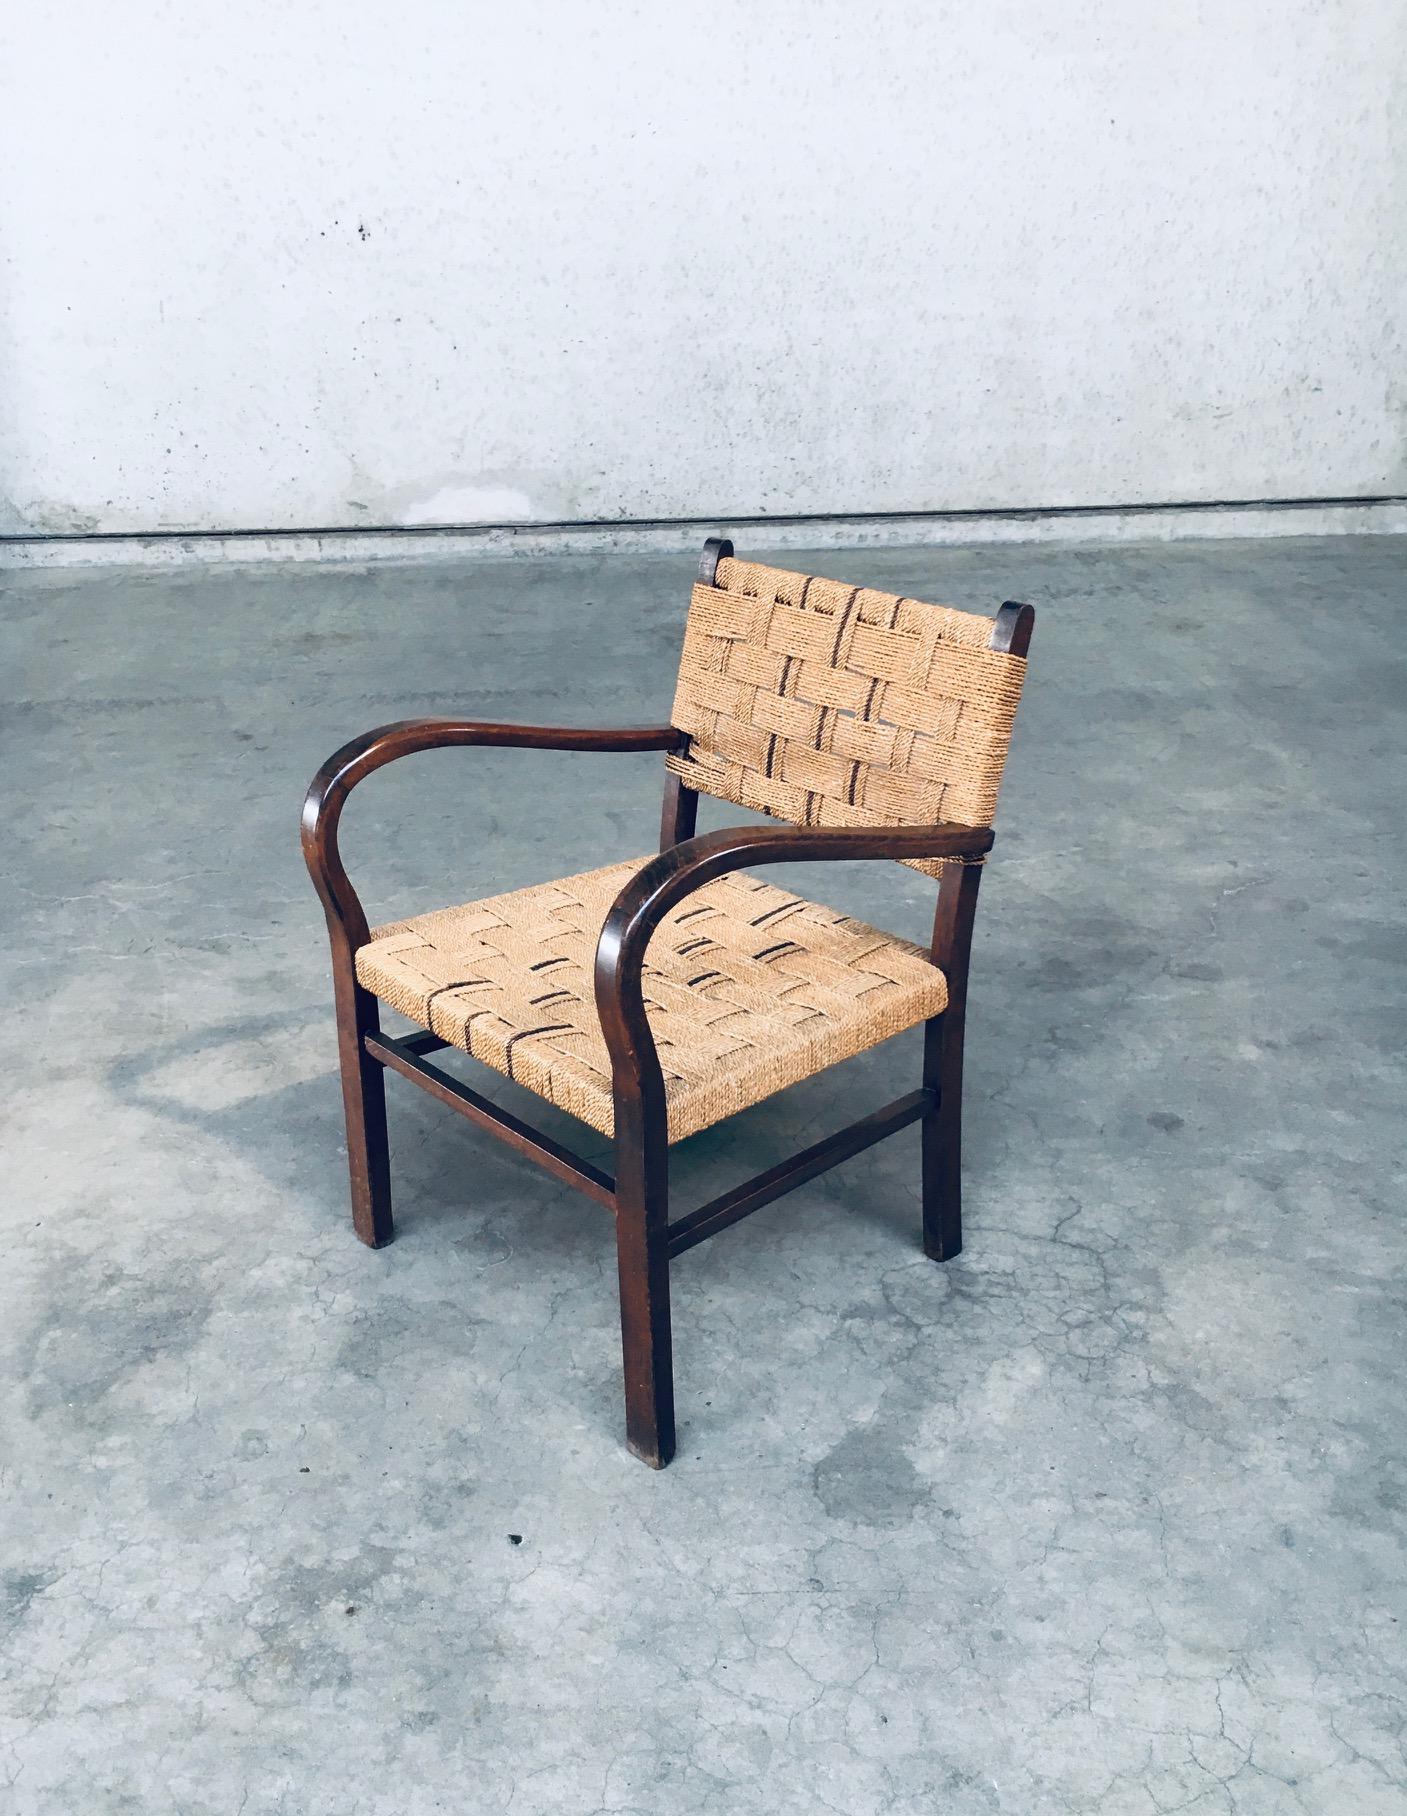 Vintage Bauhaus Period Arm Chair by Axel Larsson for Bodafors, Sweden 1930's / 1940's period. Stained beech wooden frame with twisted rope seat and back rest. Nice detailed with a darker cord that runs in the back and seat. In very good, all